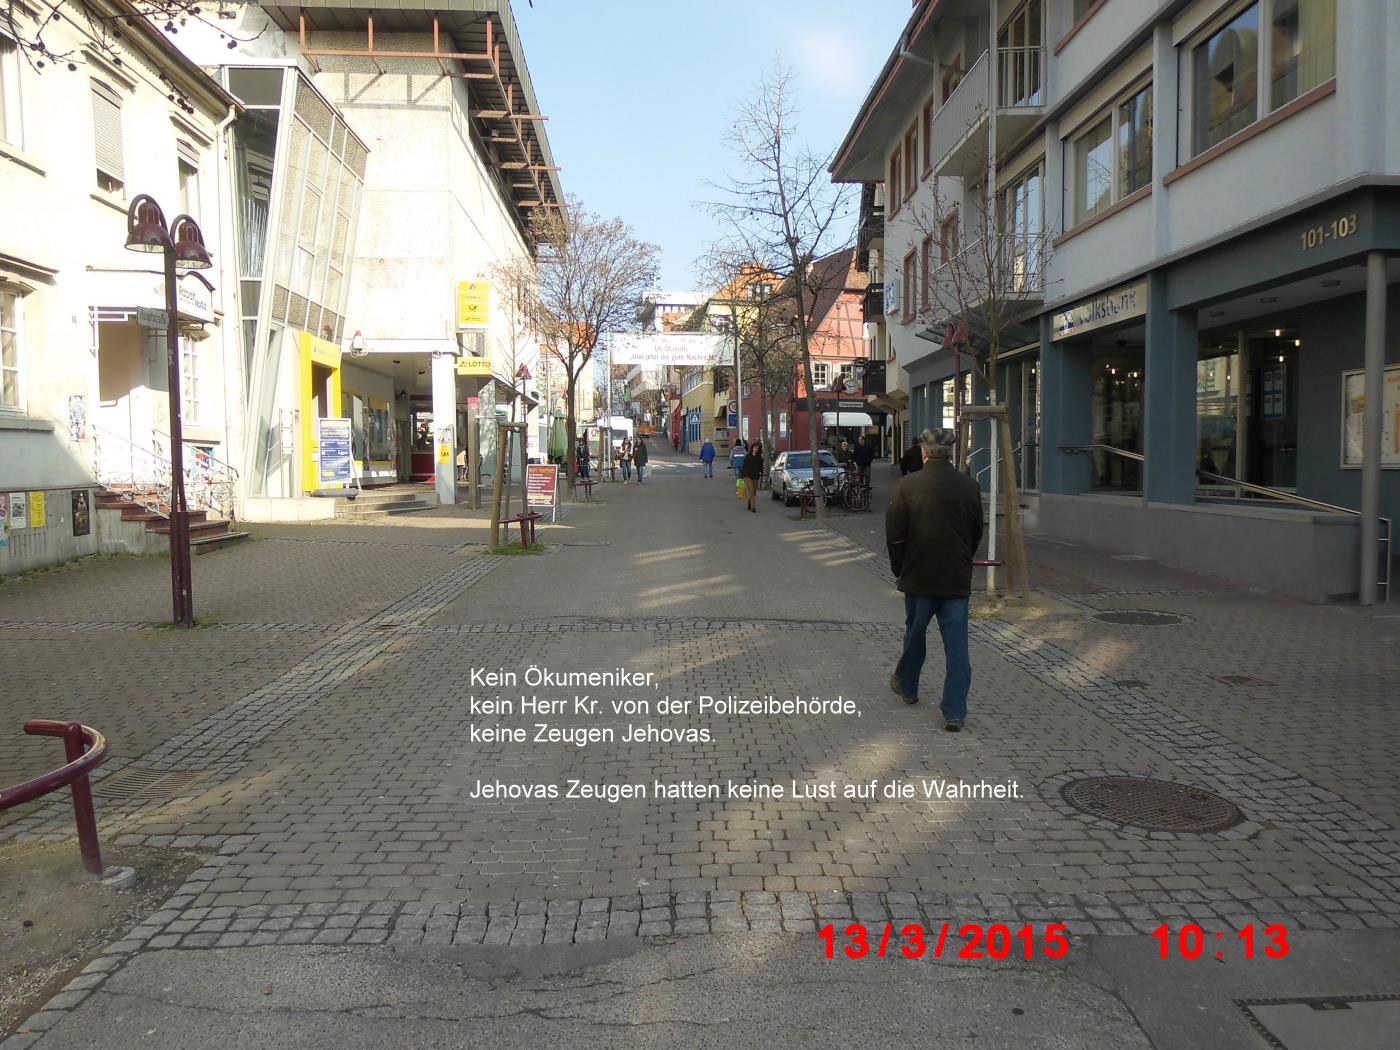 Wiesloch: Jehovah's Witnesses yield to truth